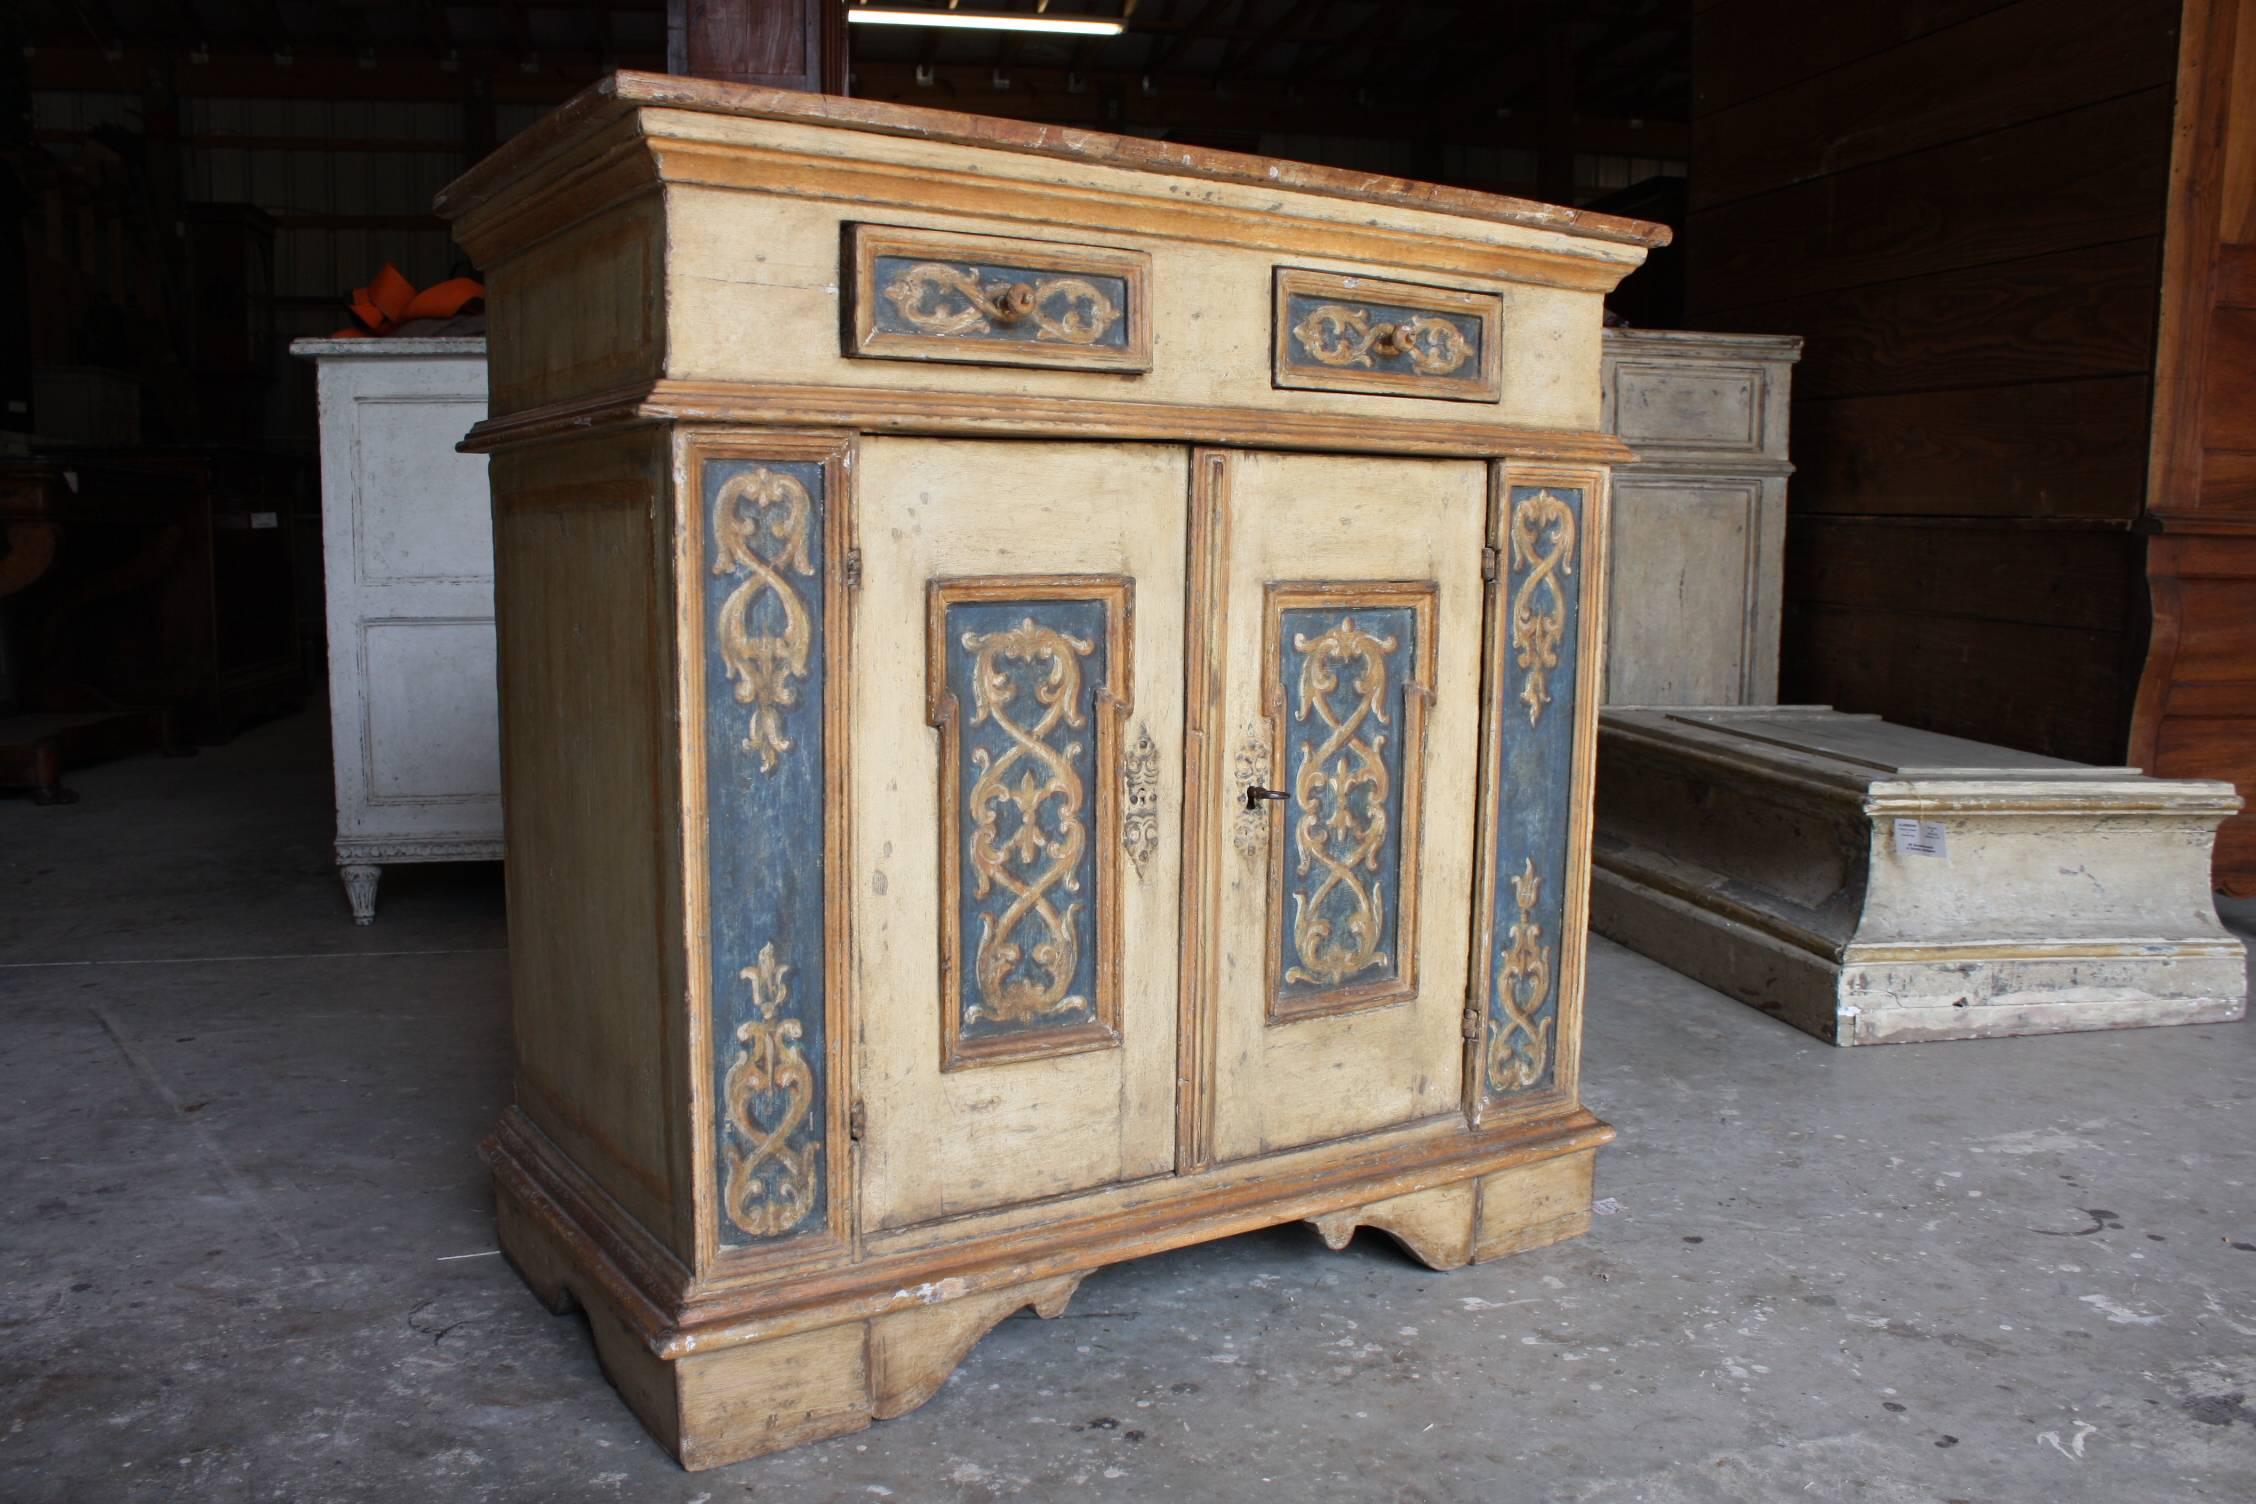 Beautifully painted Italian two-door cabinet or buffet with faux marble painted top.